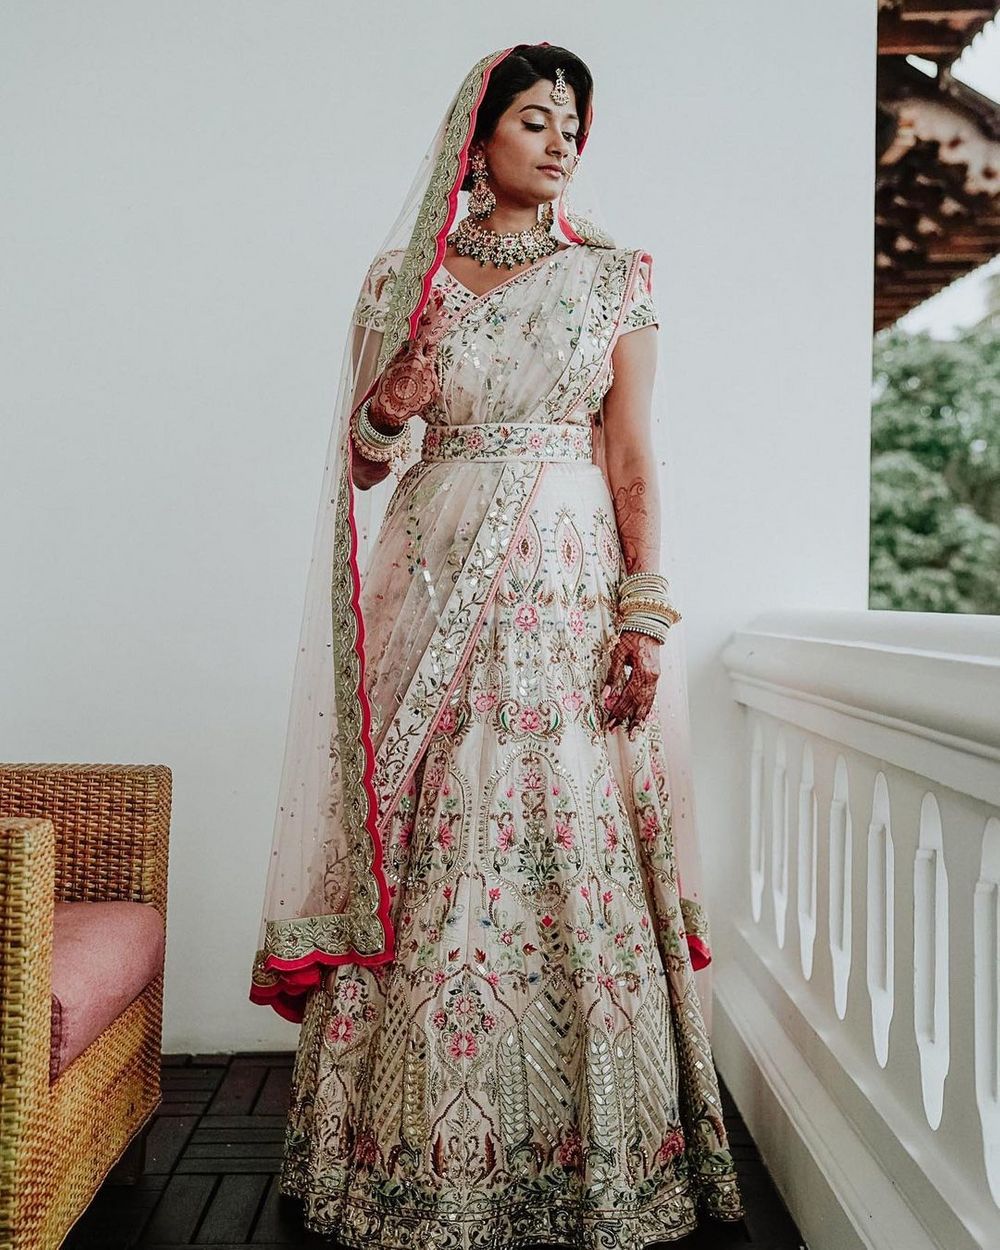 Photo of Bride dressed in ivory belted lehenga for her wedding.